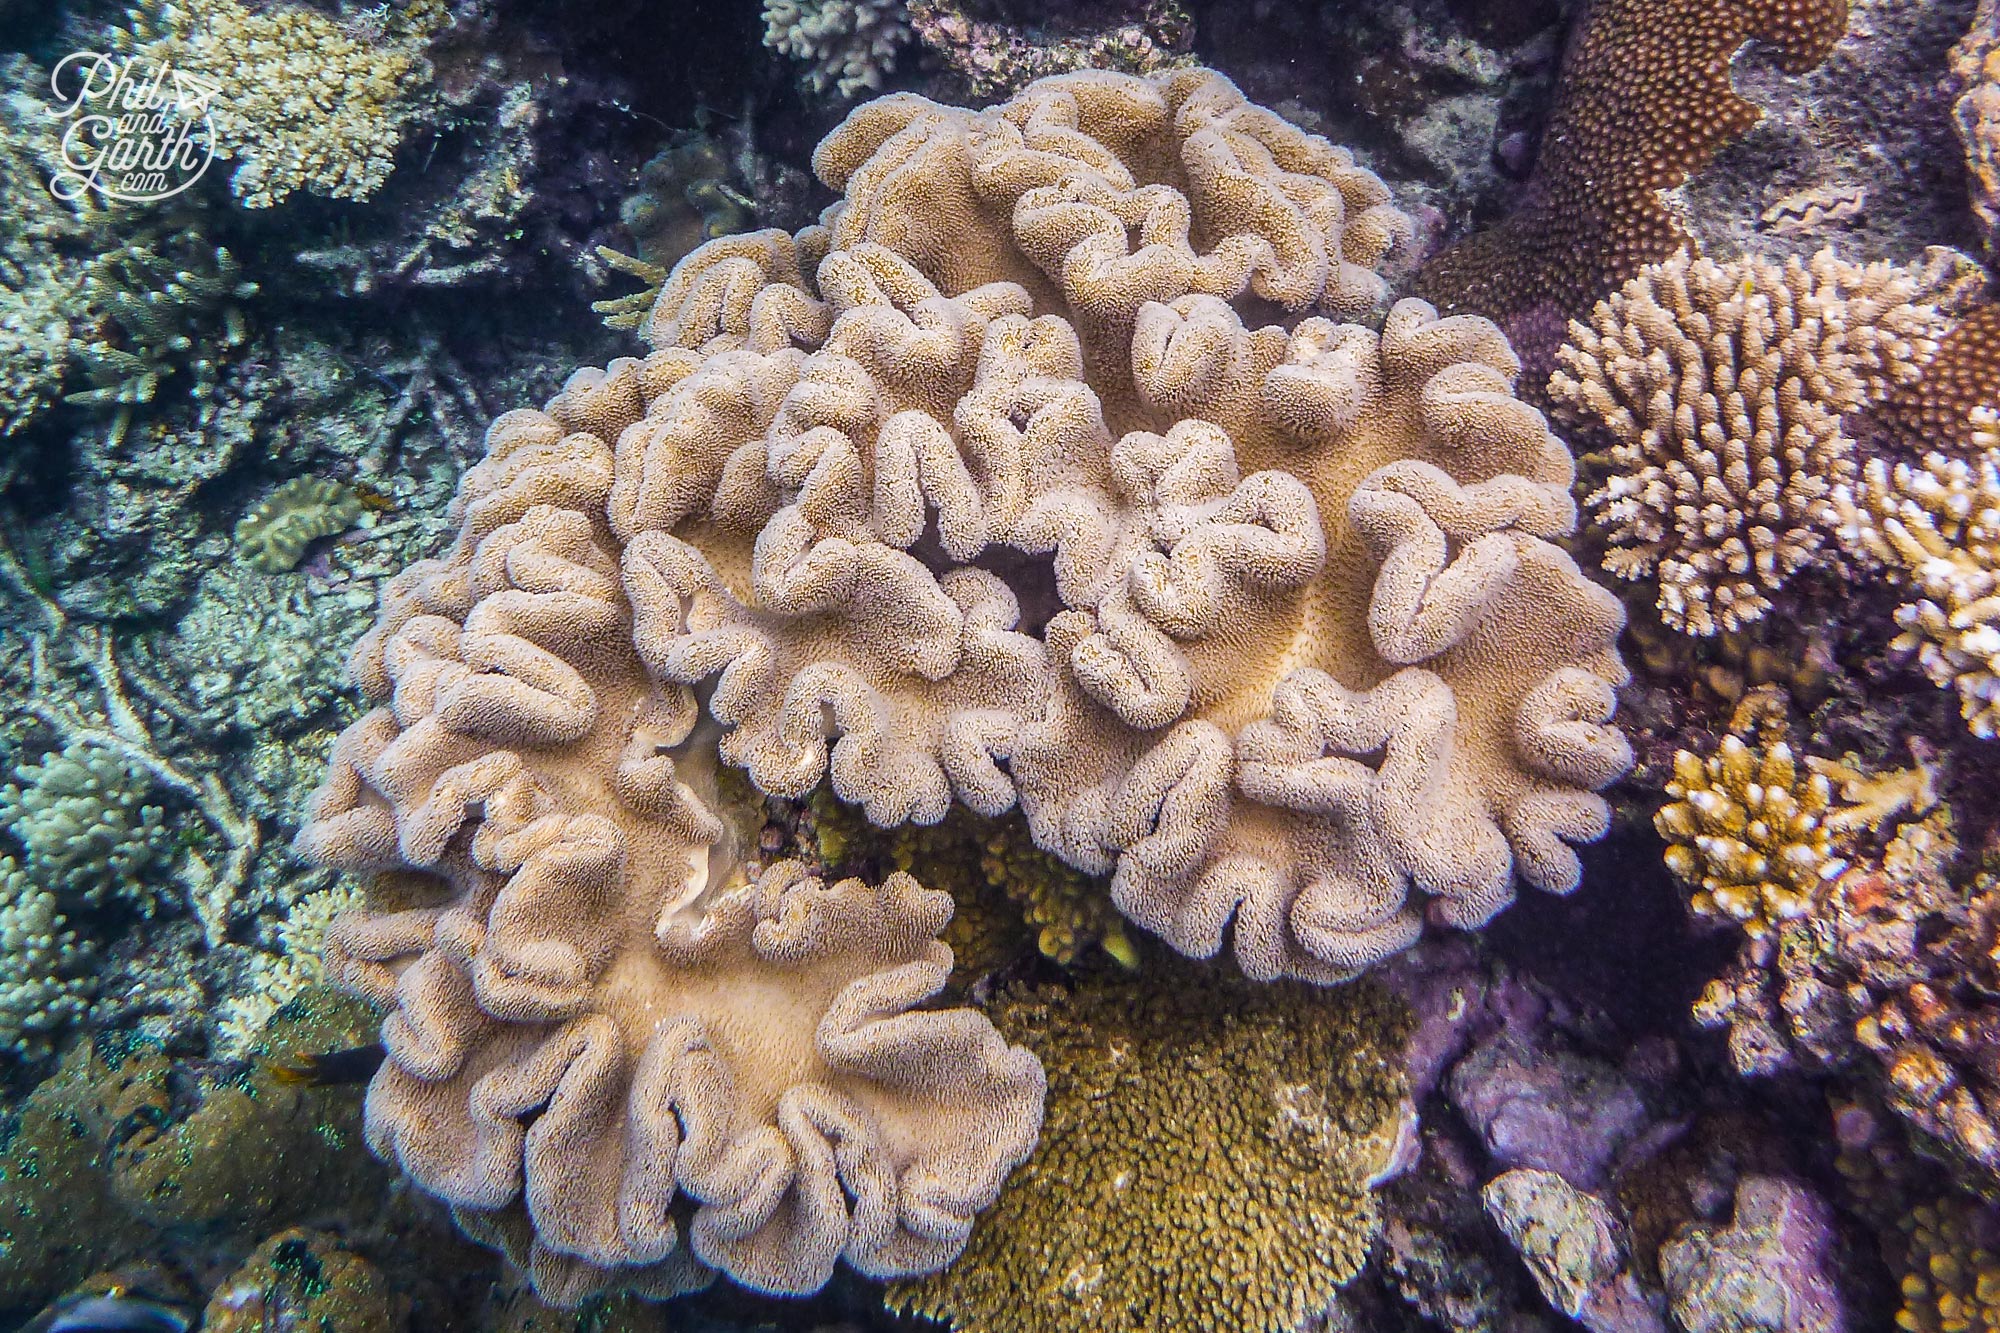 So many different types of coral, this one looks like a brain